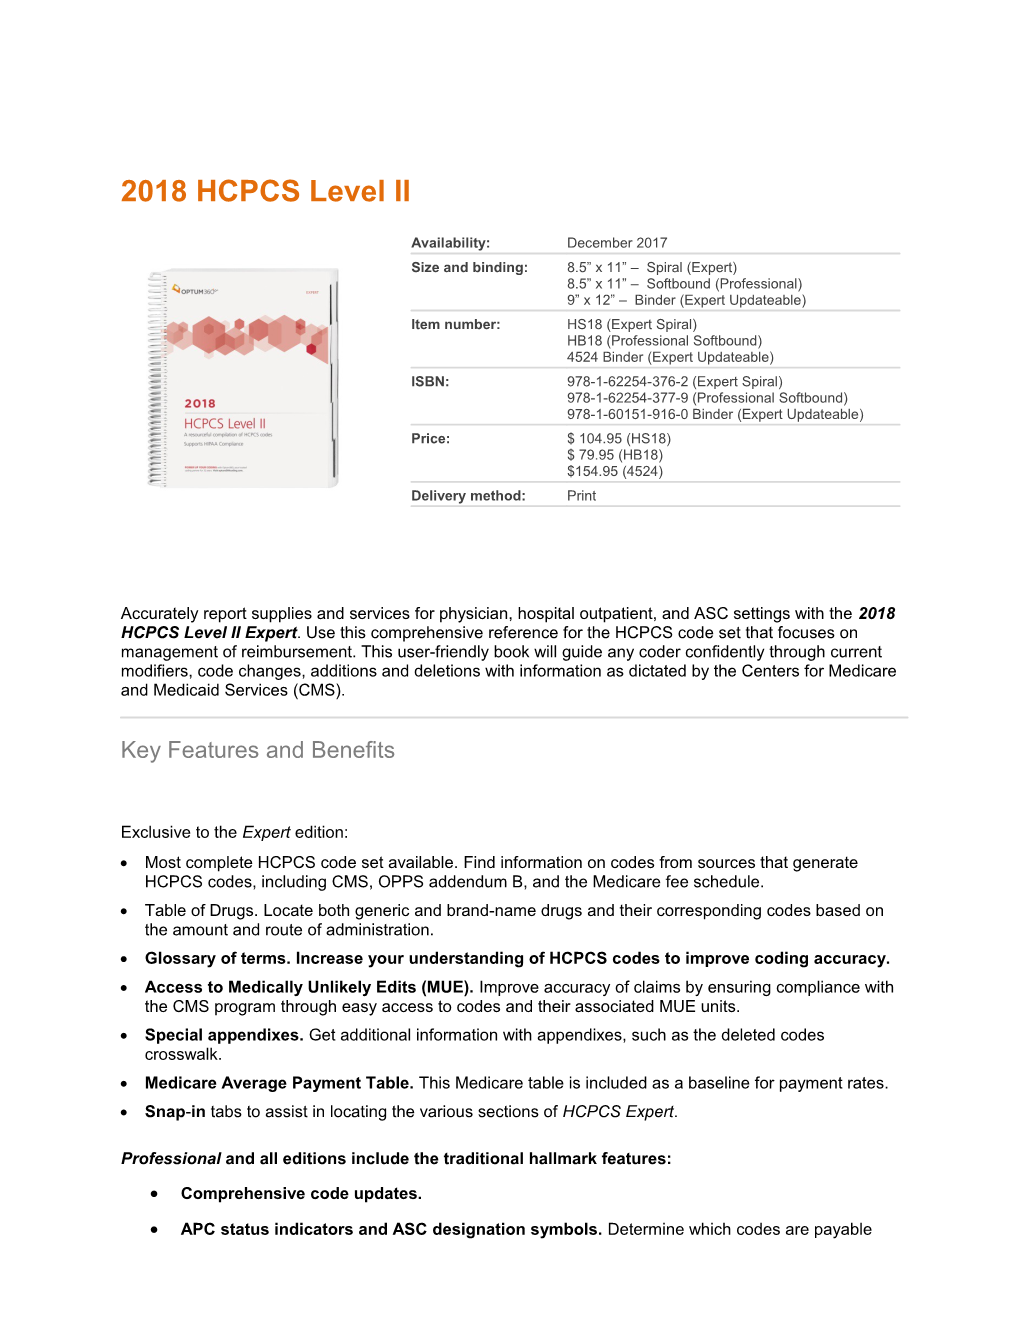 Glossary of Terms.Increase Your Understanding of HCPCS Codes to Improve Coding Accuracy